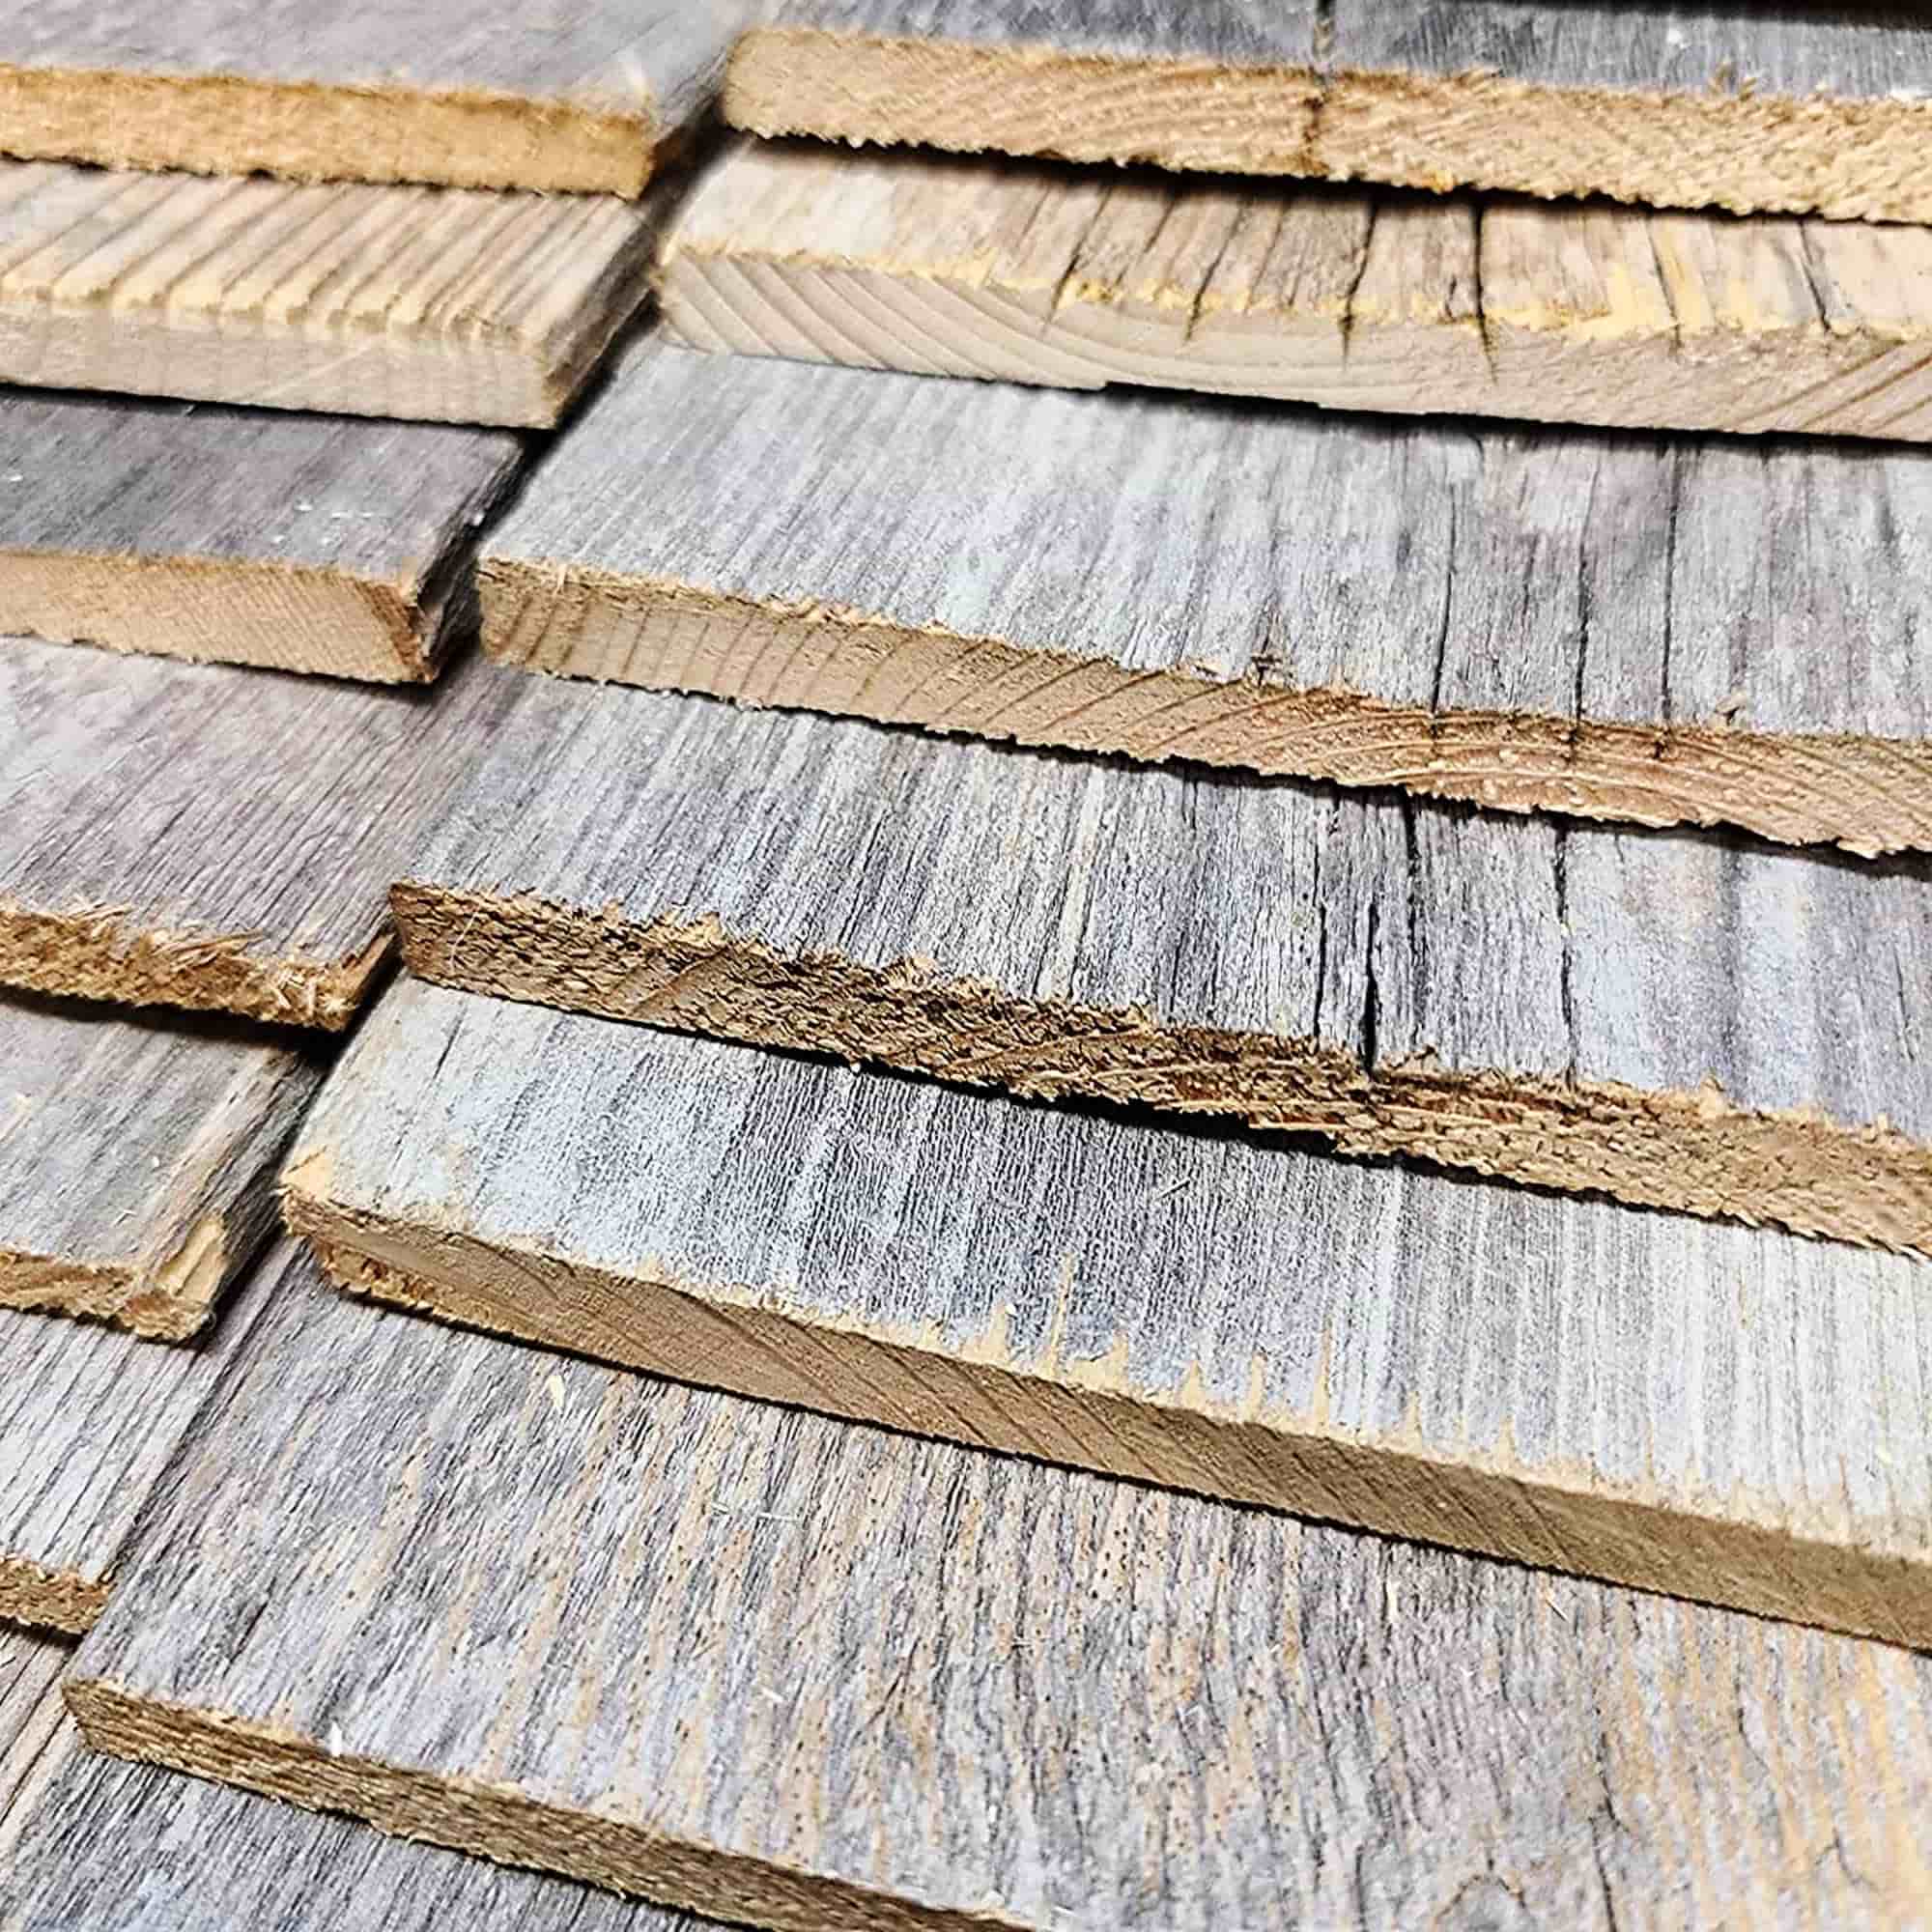 Bright Creations Rustic Weathered Reclaimed Wood Bundle for Crafts (3.5 x 12 x 0.5 in, 6 Pack)